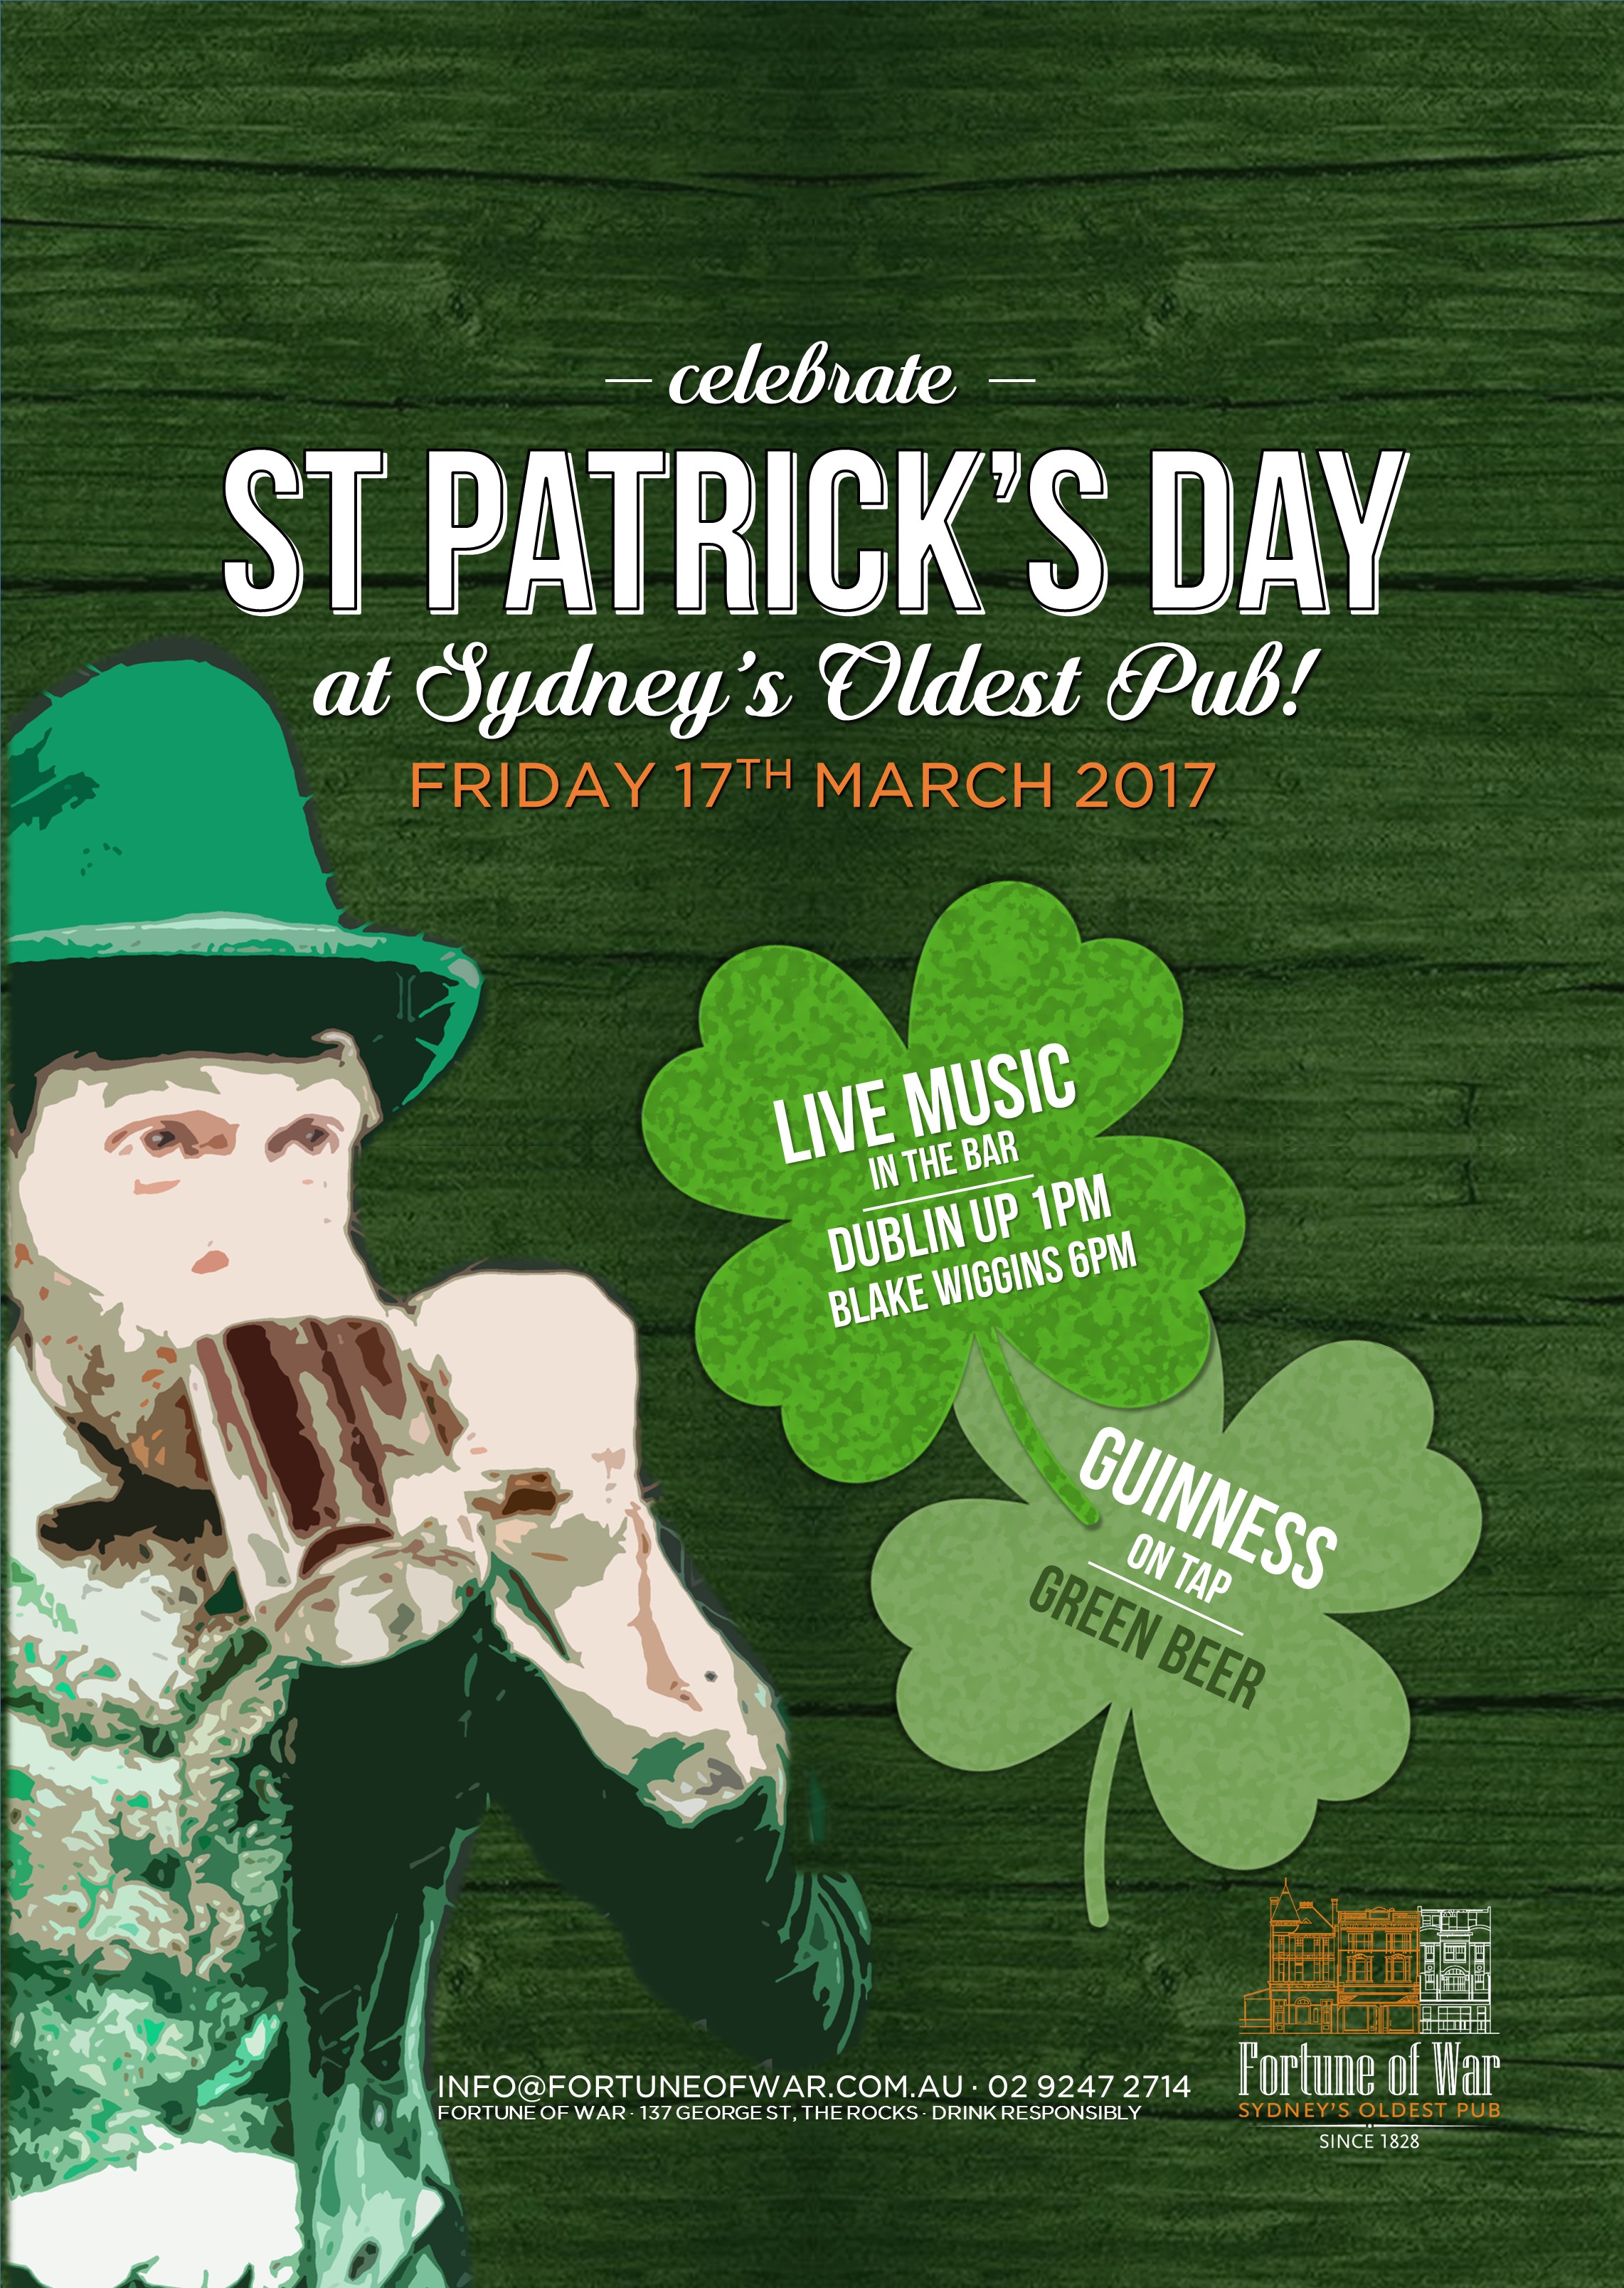 St Patrick's Day Pats The Rocks Sydney Fortune of War Bar Pub Guinness